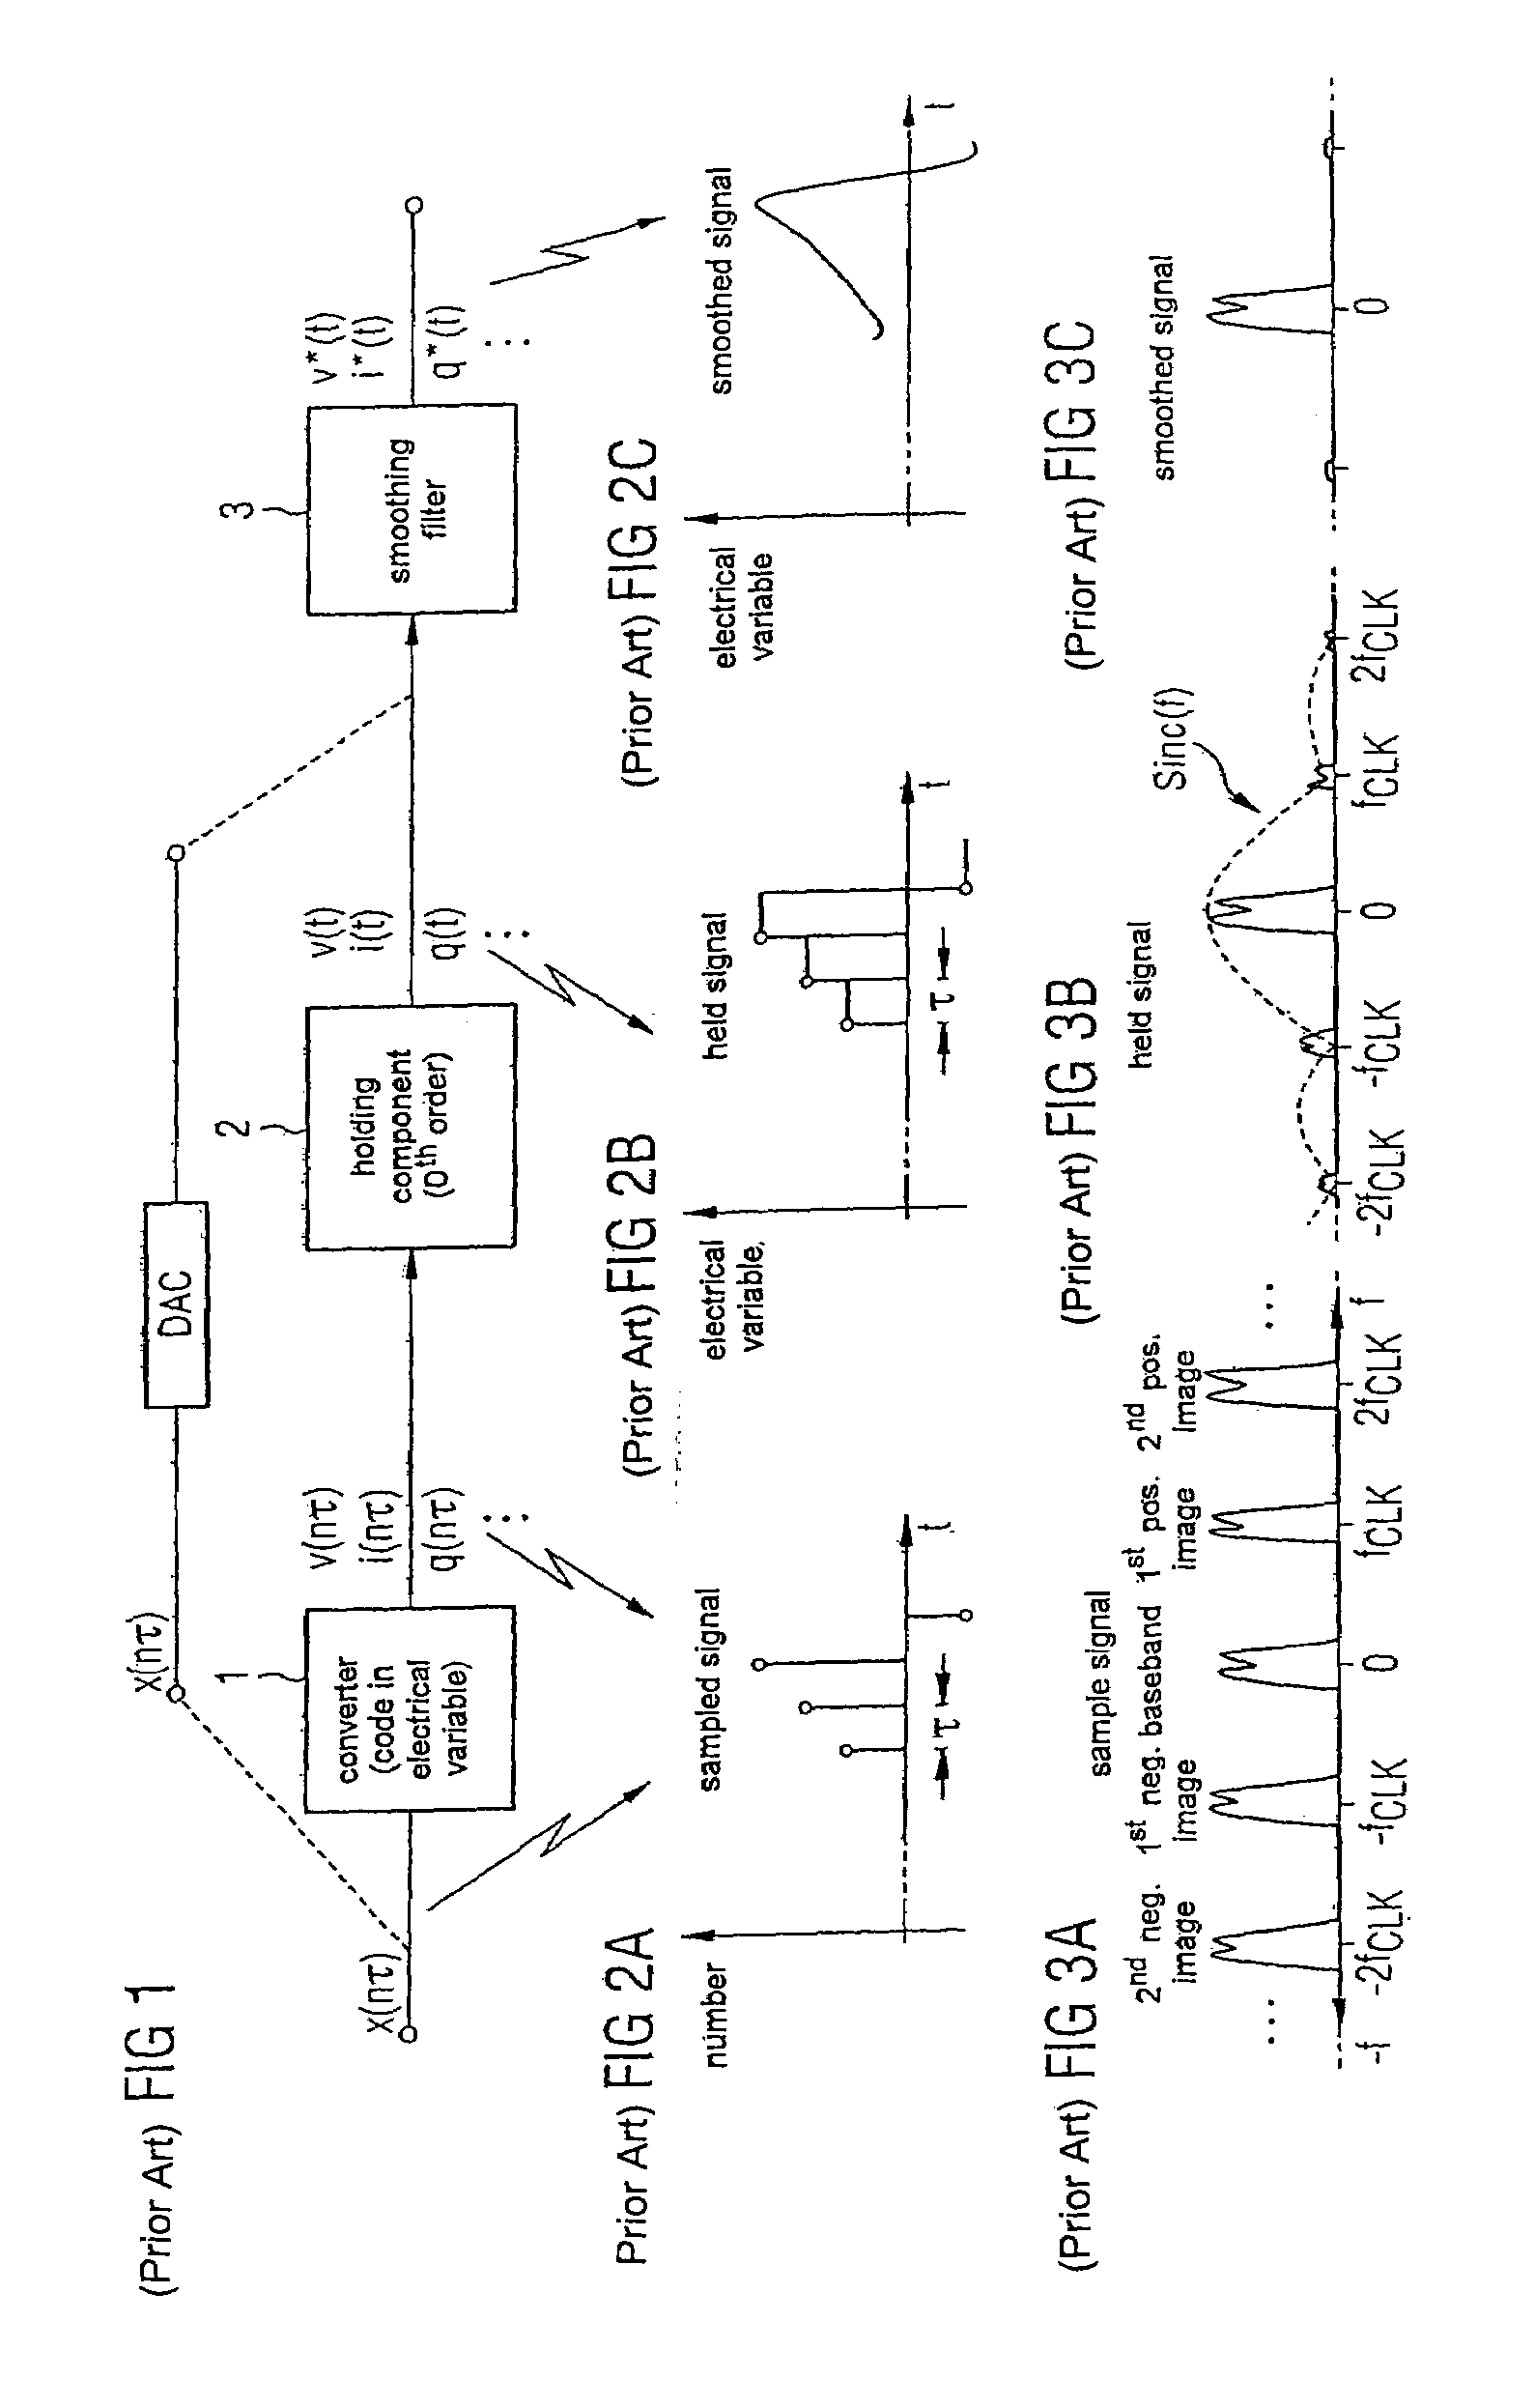 Digital-to-analog converter using a frequency hopping clock generator